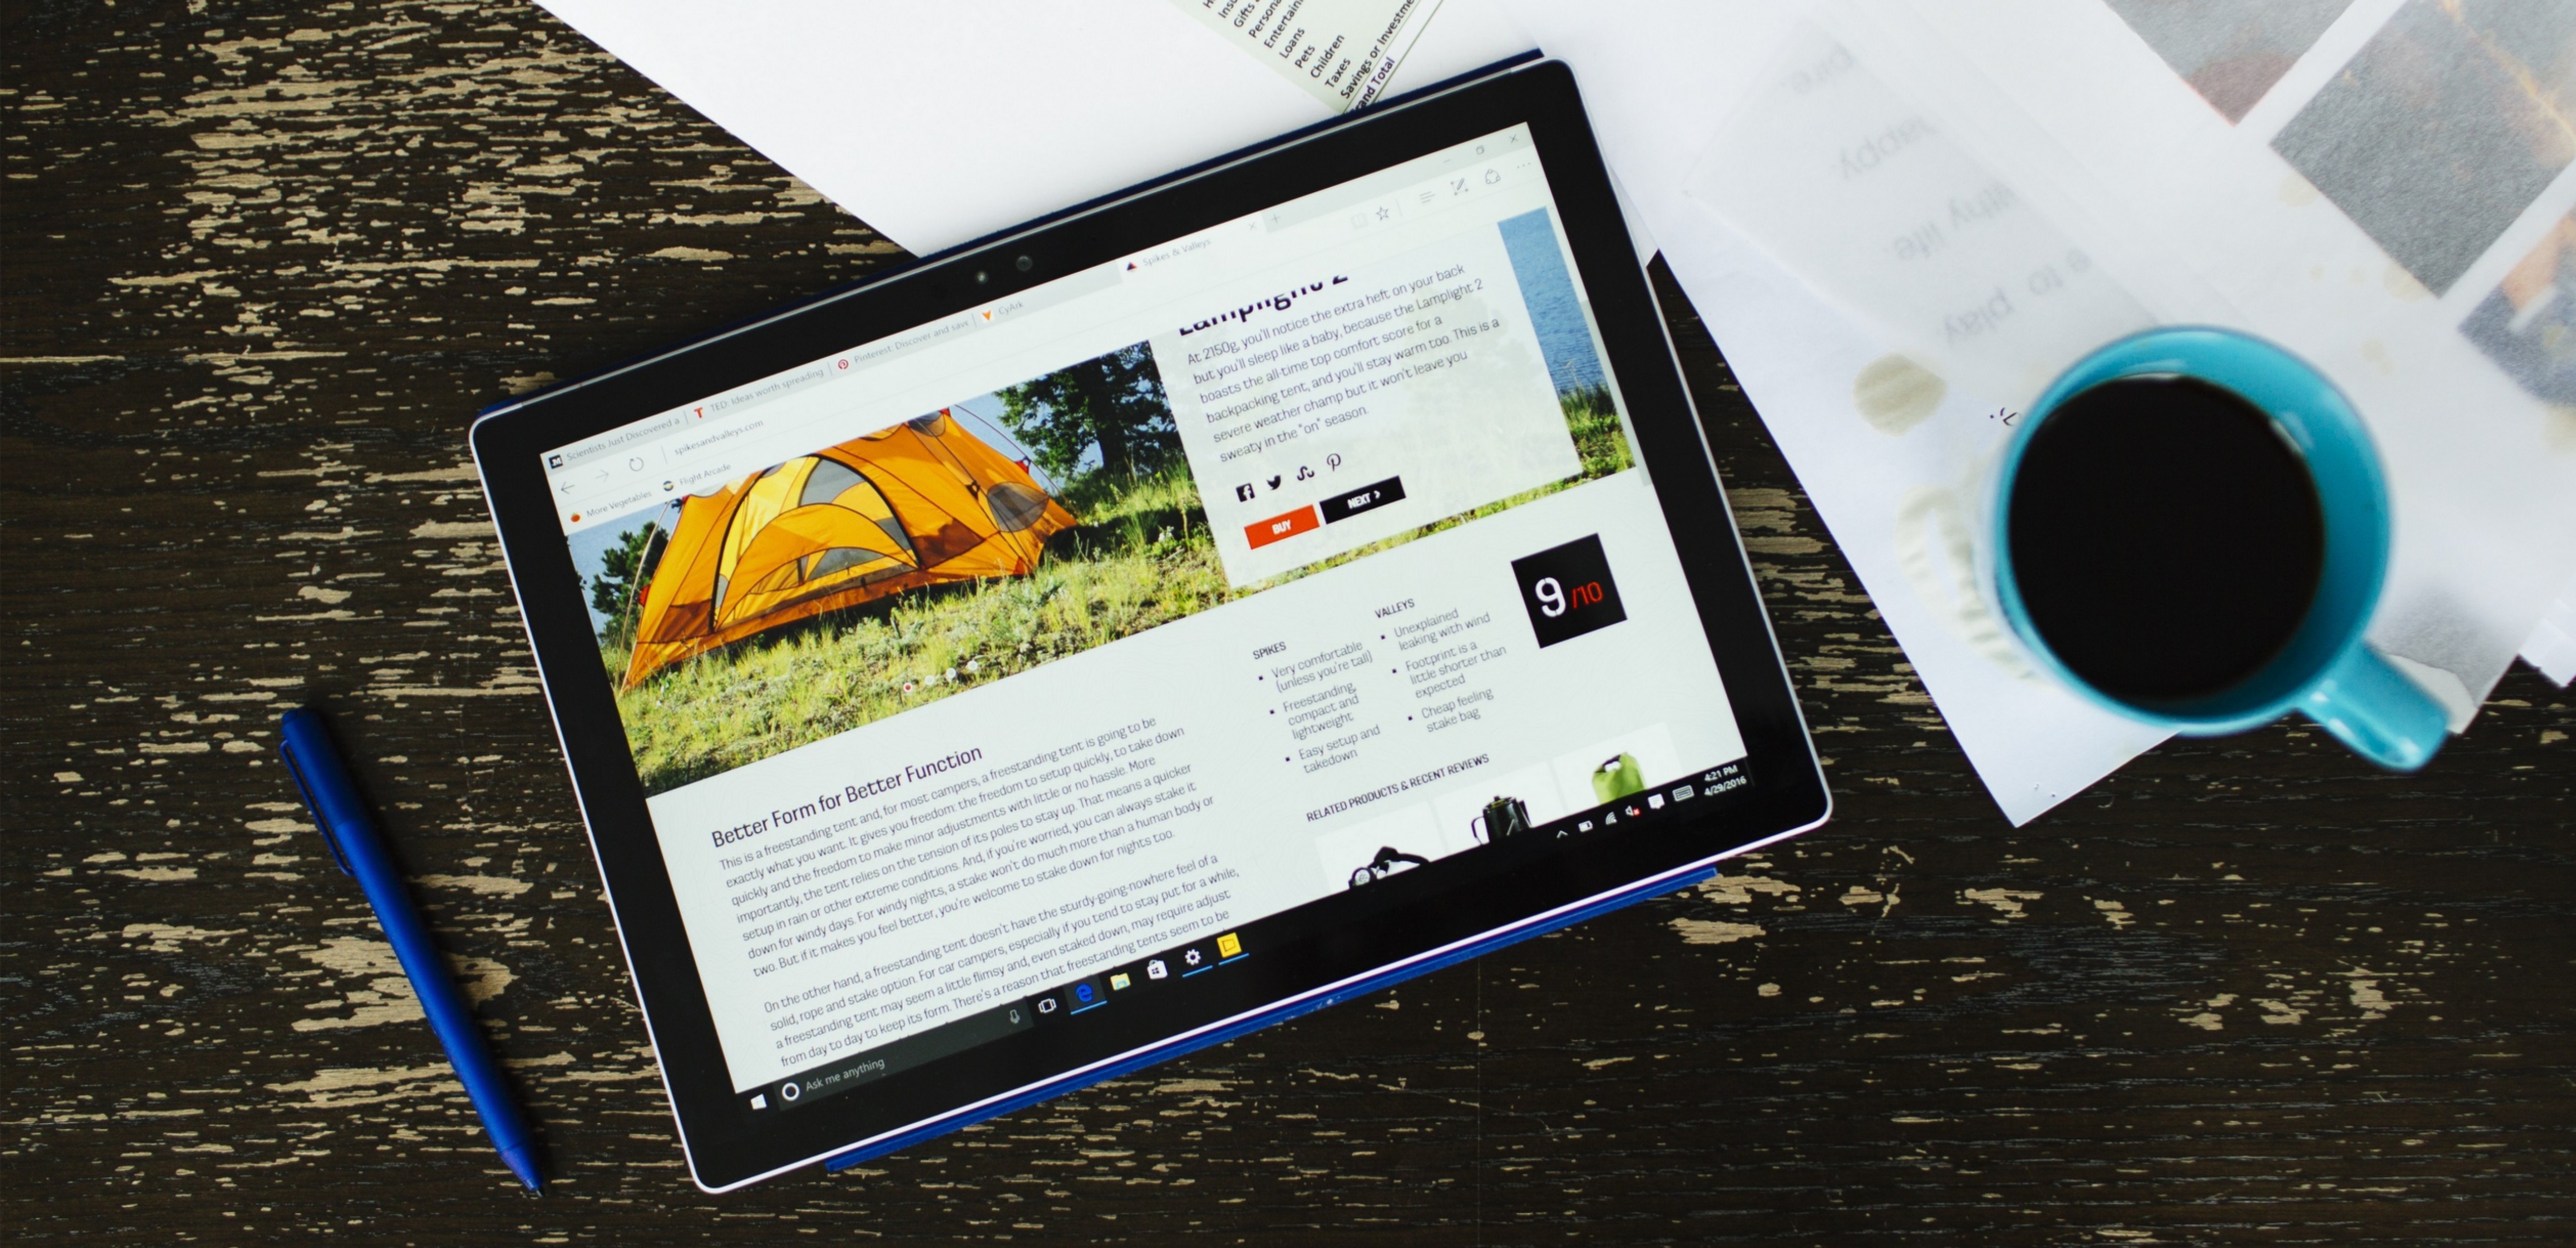 Microsoft Edge browser shown on a Microsoft Surface